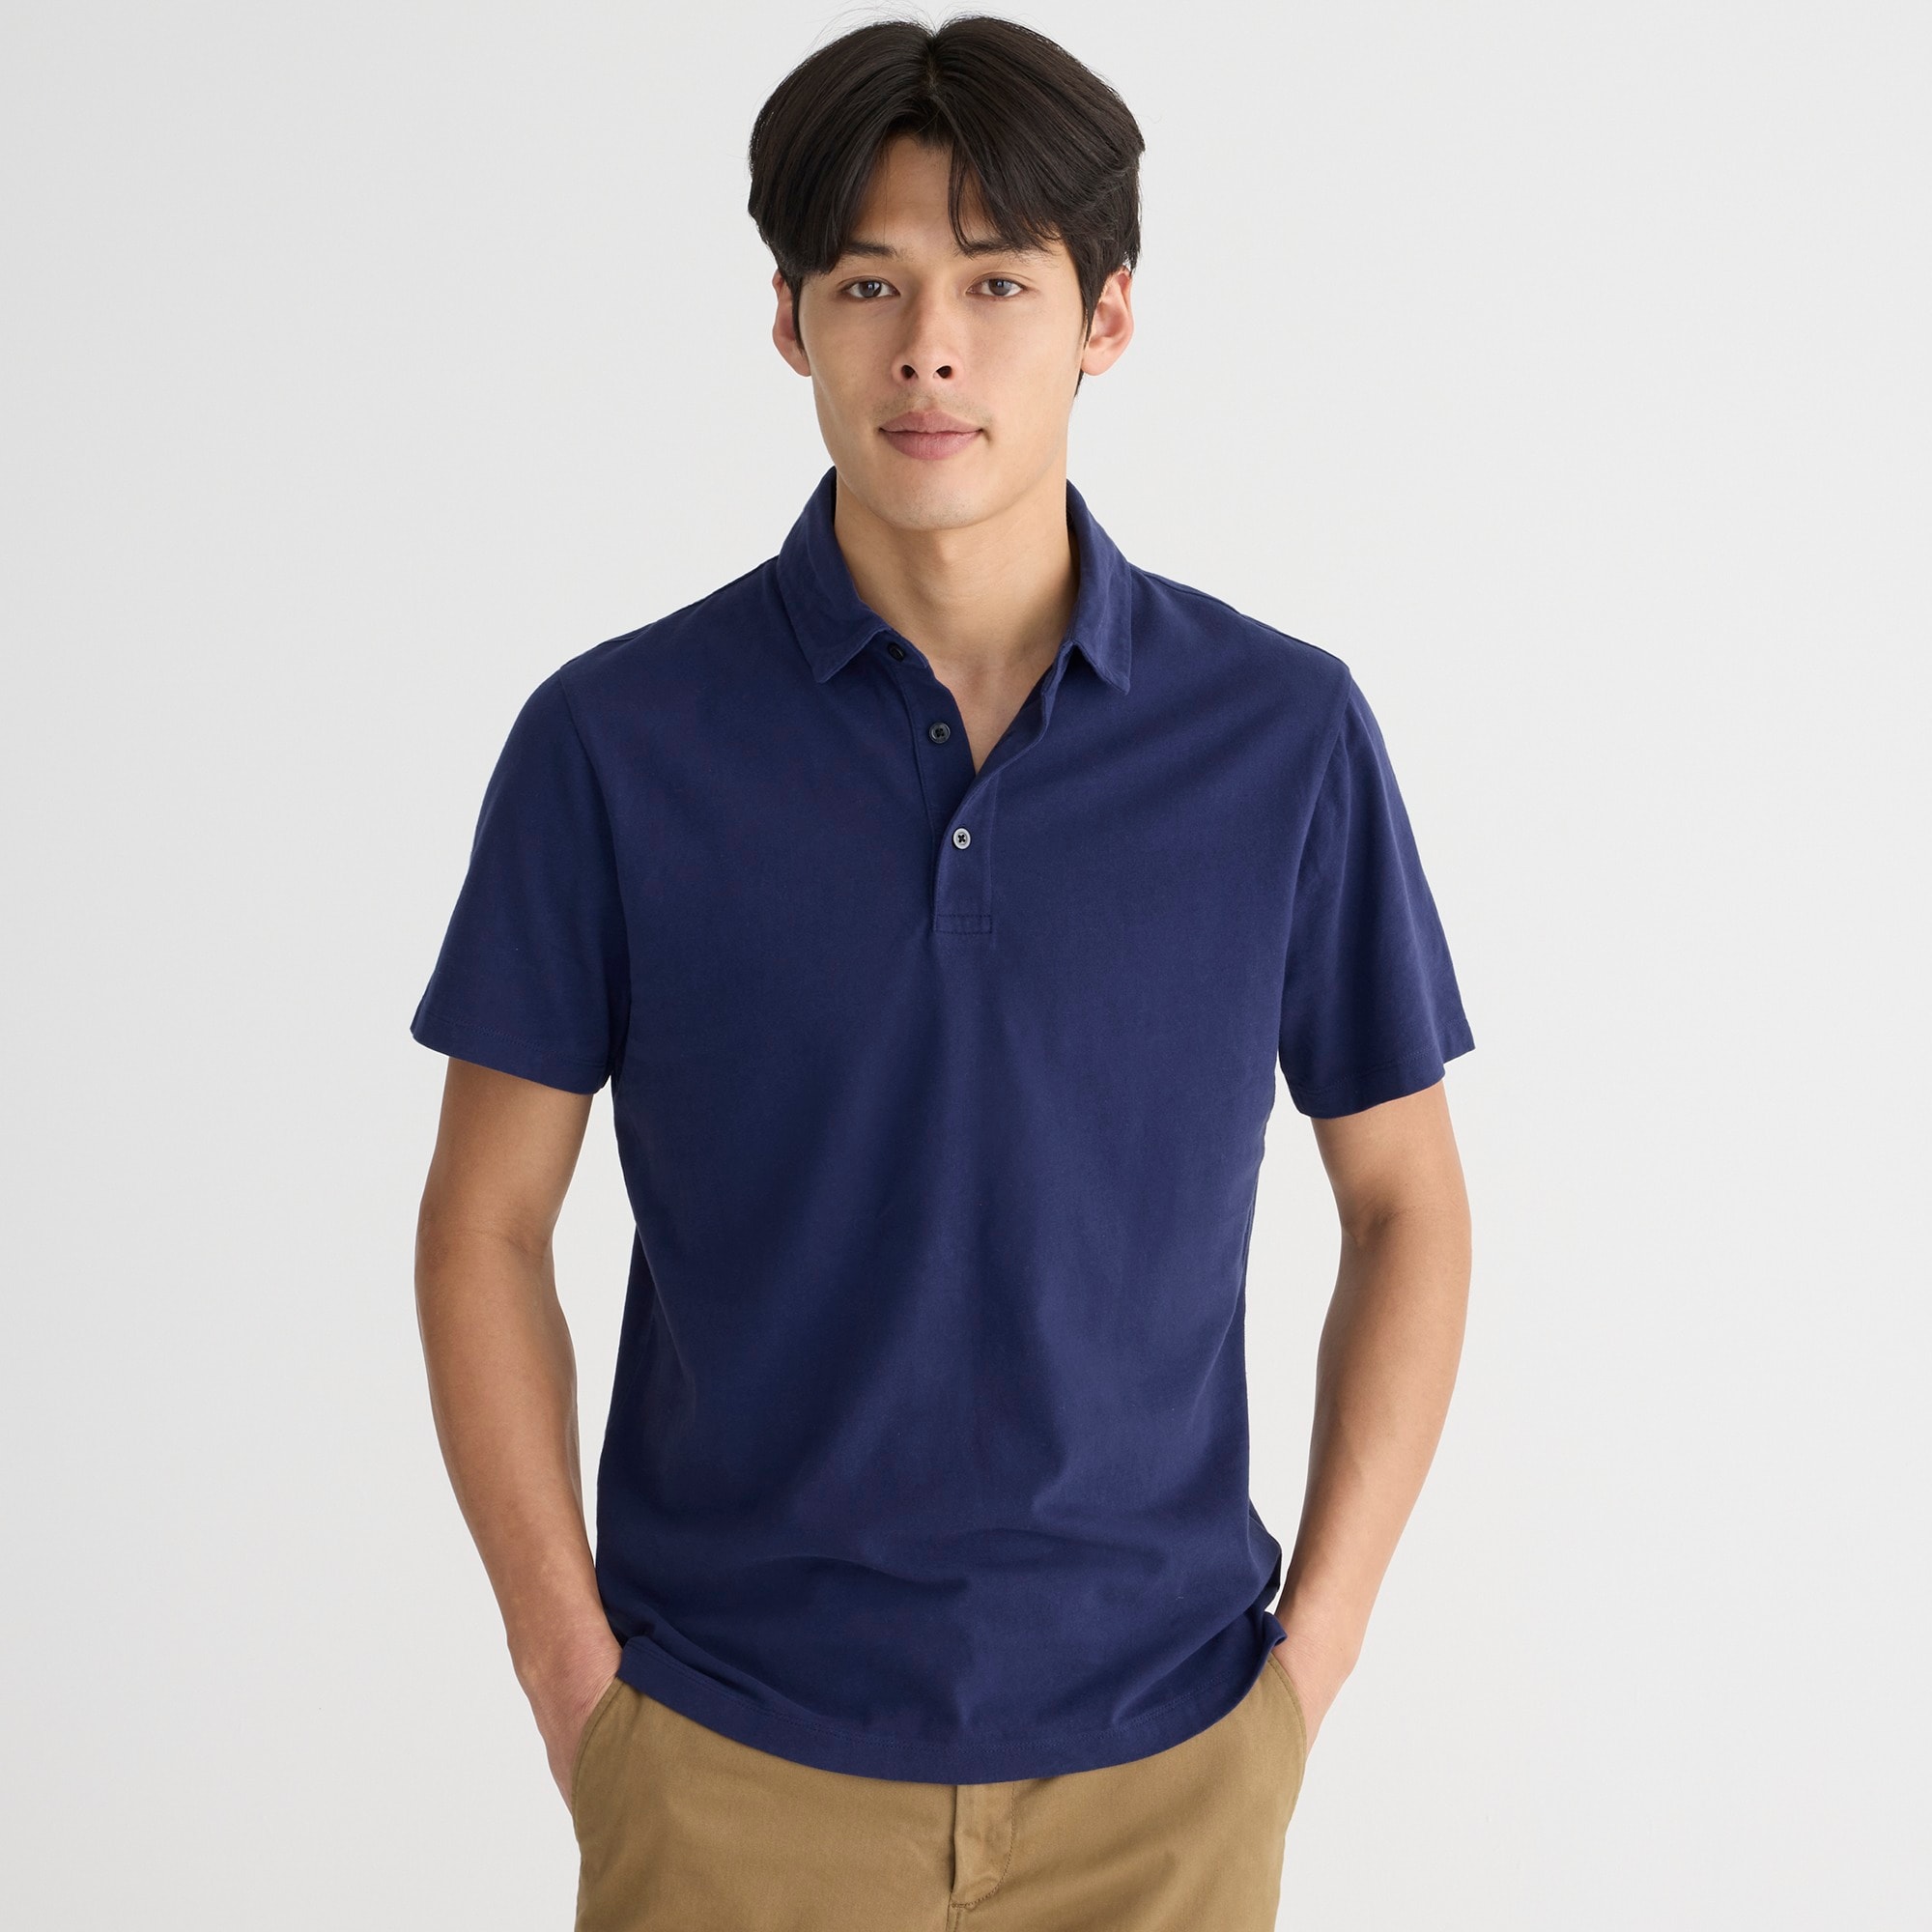 mens Sueded cotton polo shirt